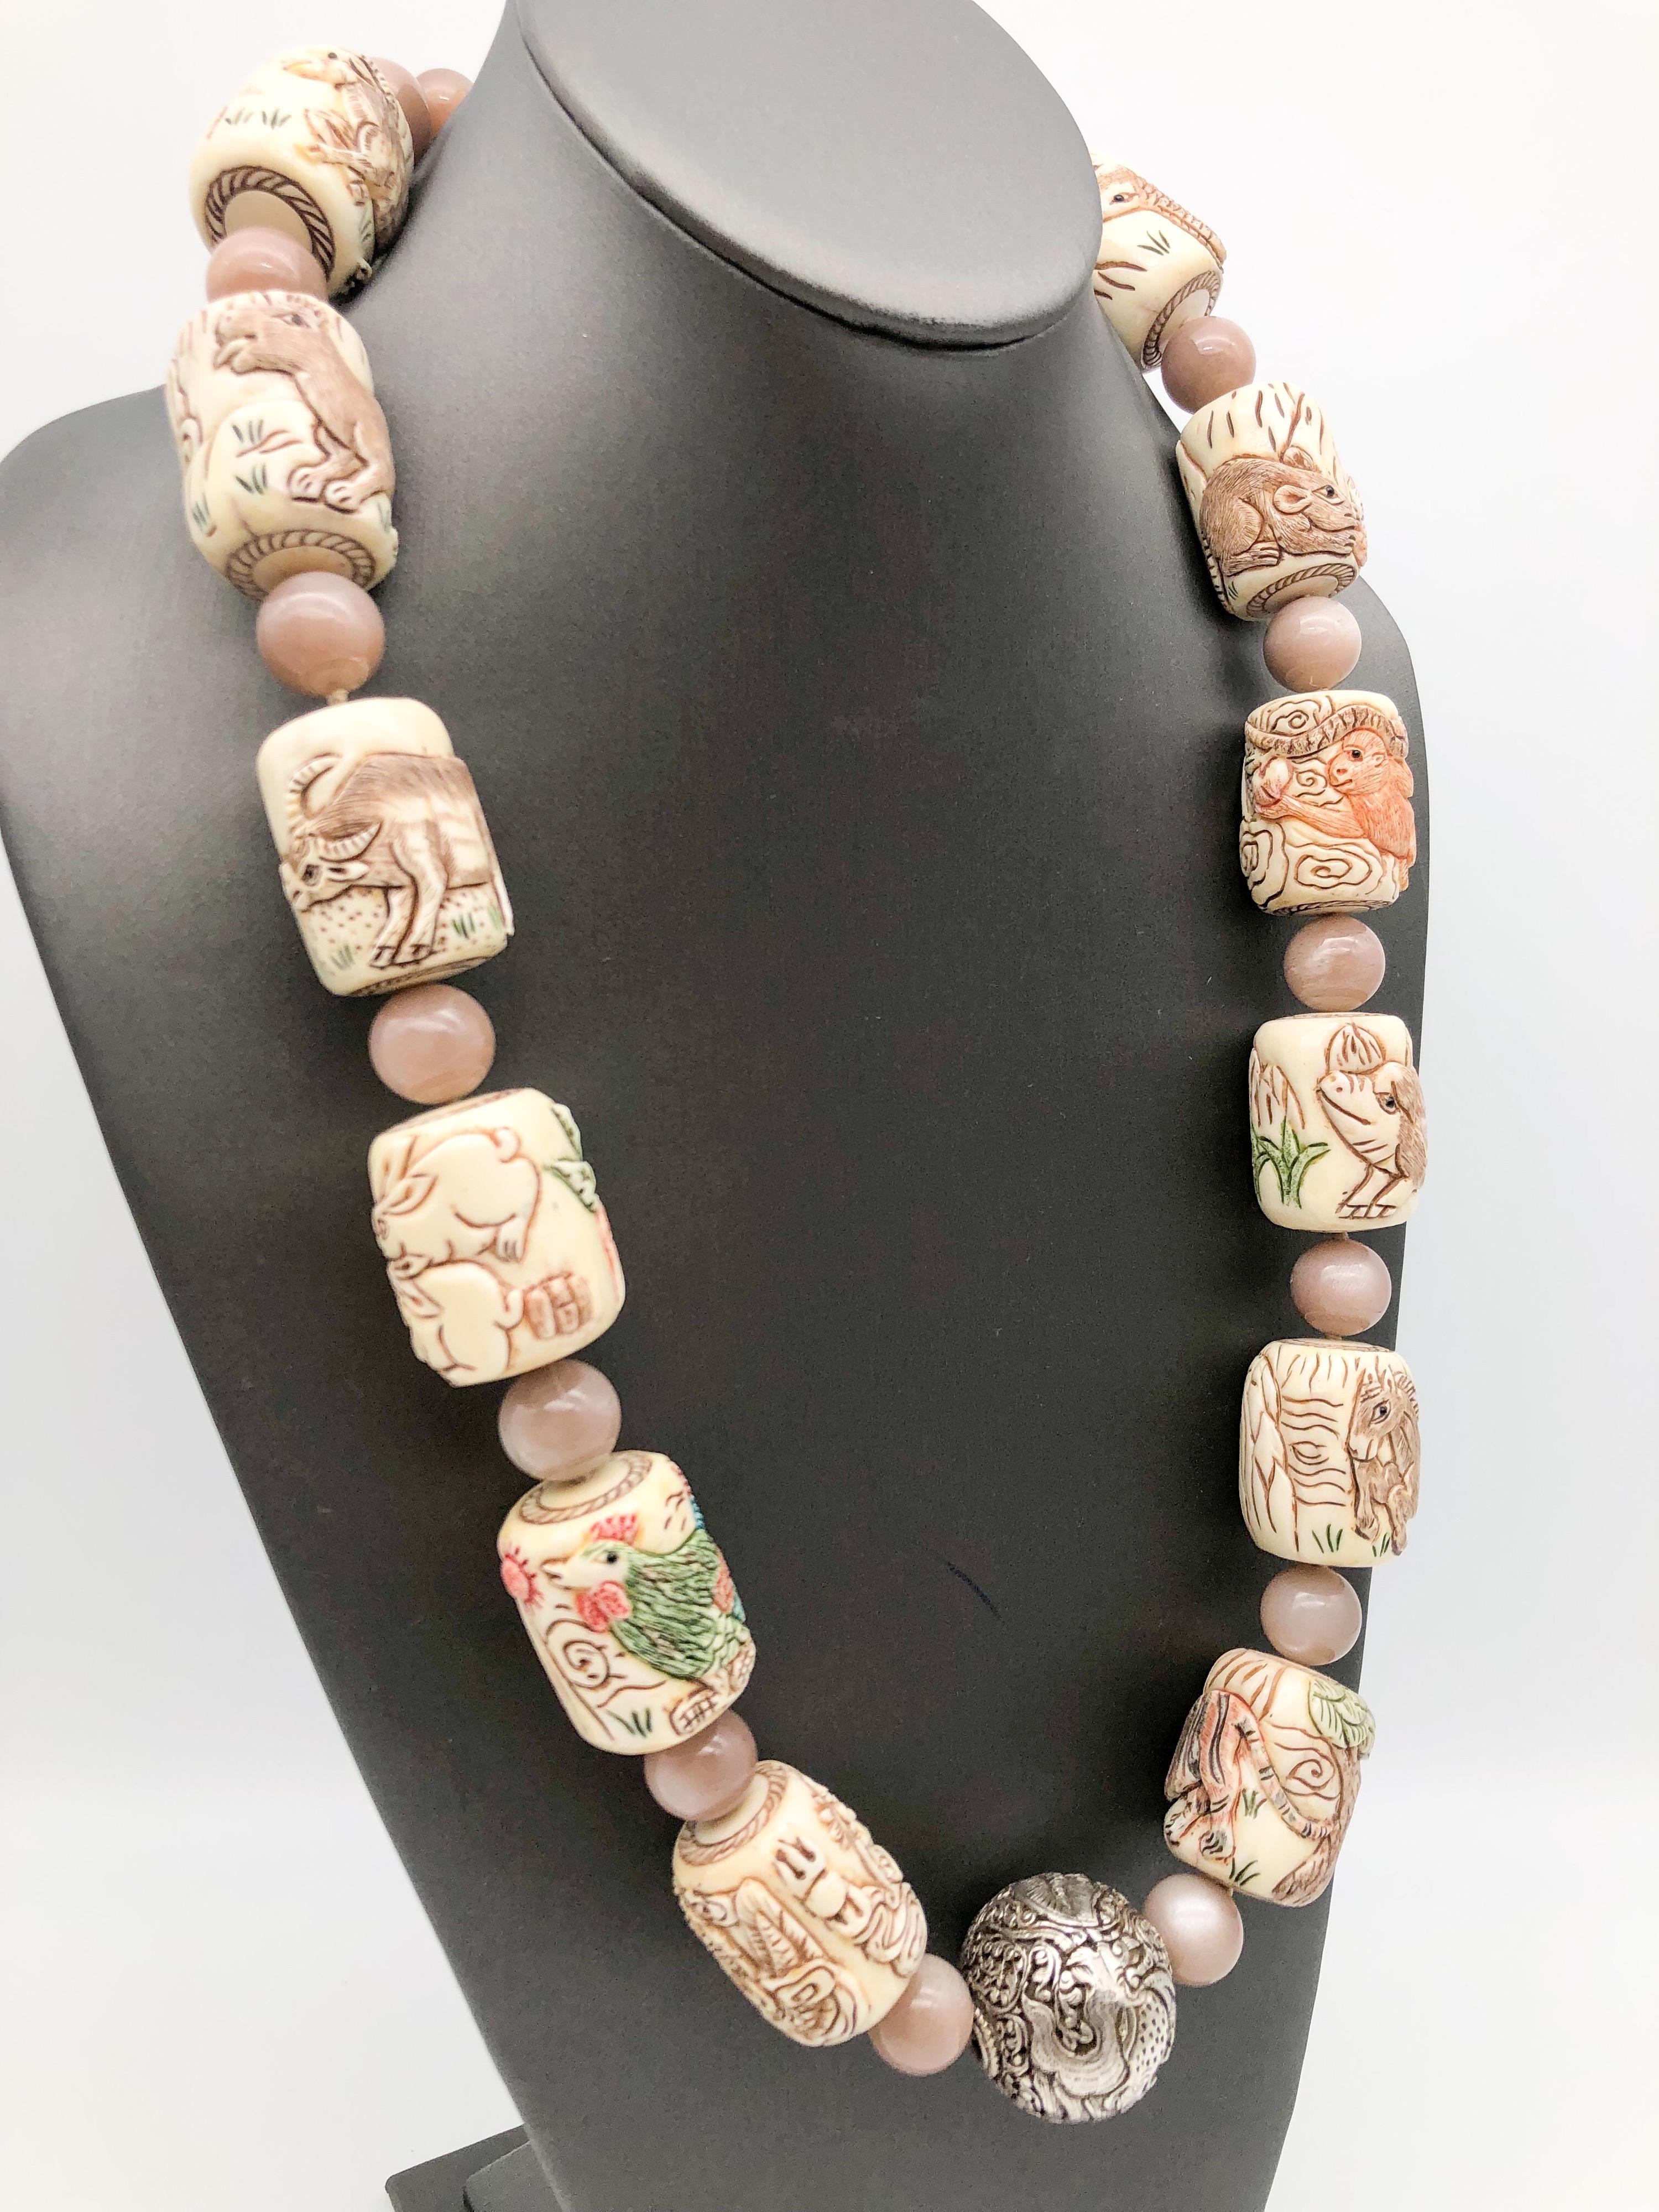 One-of-a-Kind
This is a Vintage carved bone Chinese zodiac necklace. Hand-painted 12-month of different animals for each month, the zodiac are spaced with 12-14mm Moonstone beads. Carved Sterling Silver 